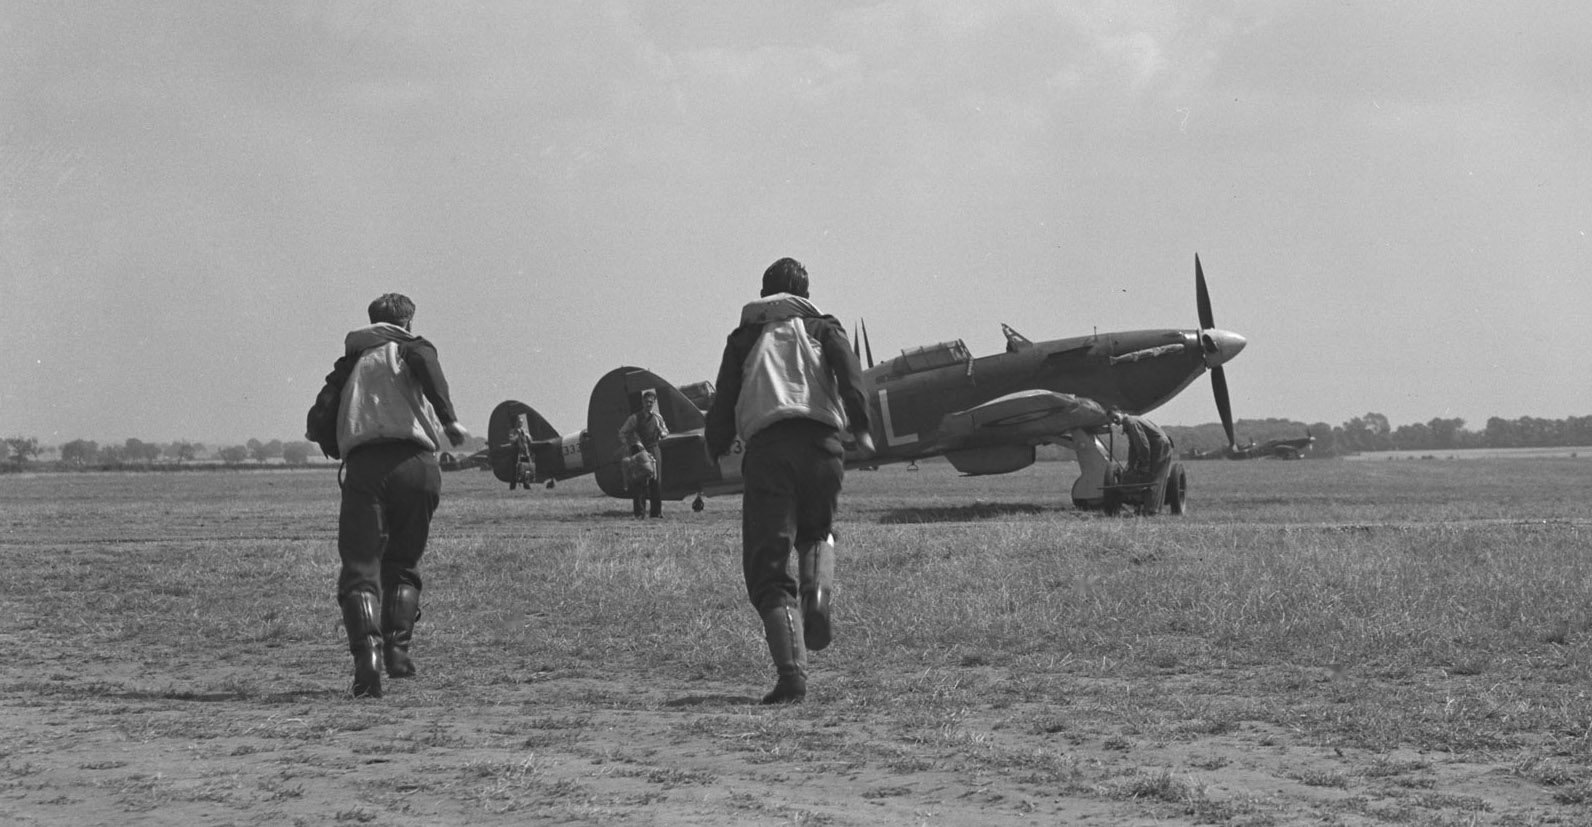 Pilots from 401 Squadron run to their Hurricane aircraft in this undated photograph. Groundcrew are waiting to help the pilots put on their parachutes and get into the aircraft. The Hurricanes could skim off the ground three minutes after an alarm was sounded. PHOTO: DND Archives, PL-4484